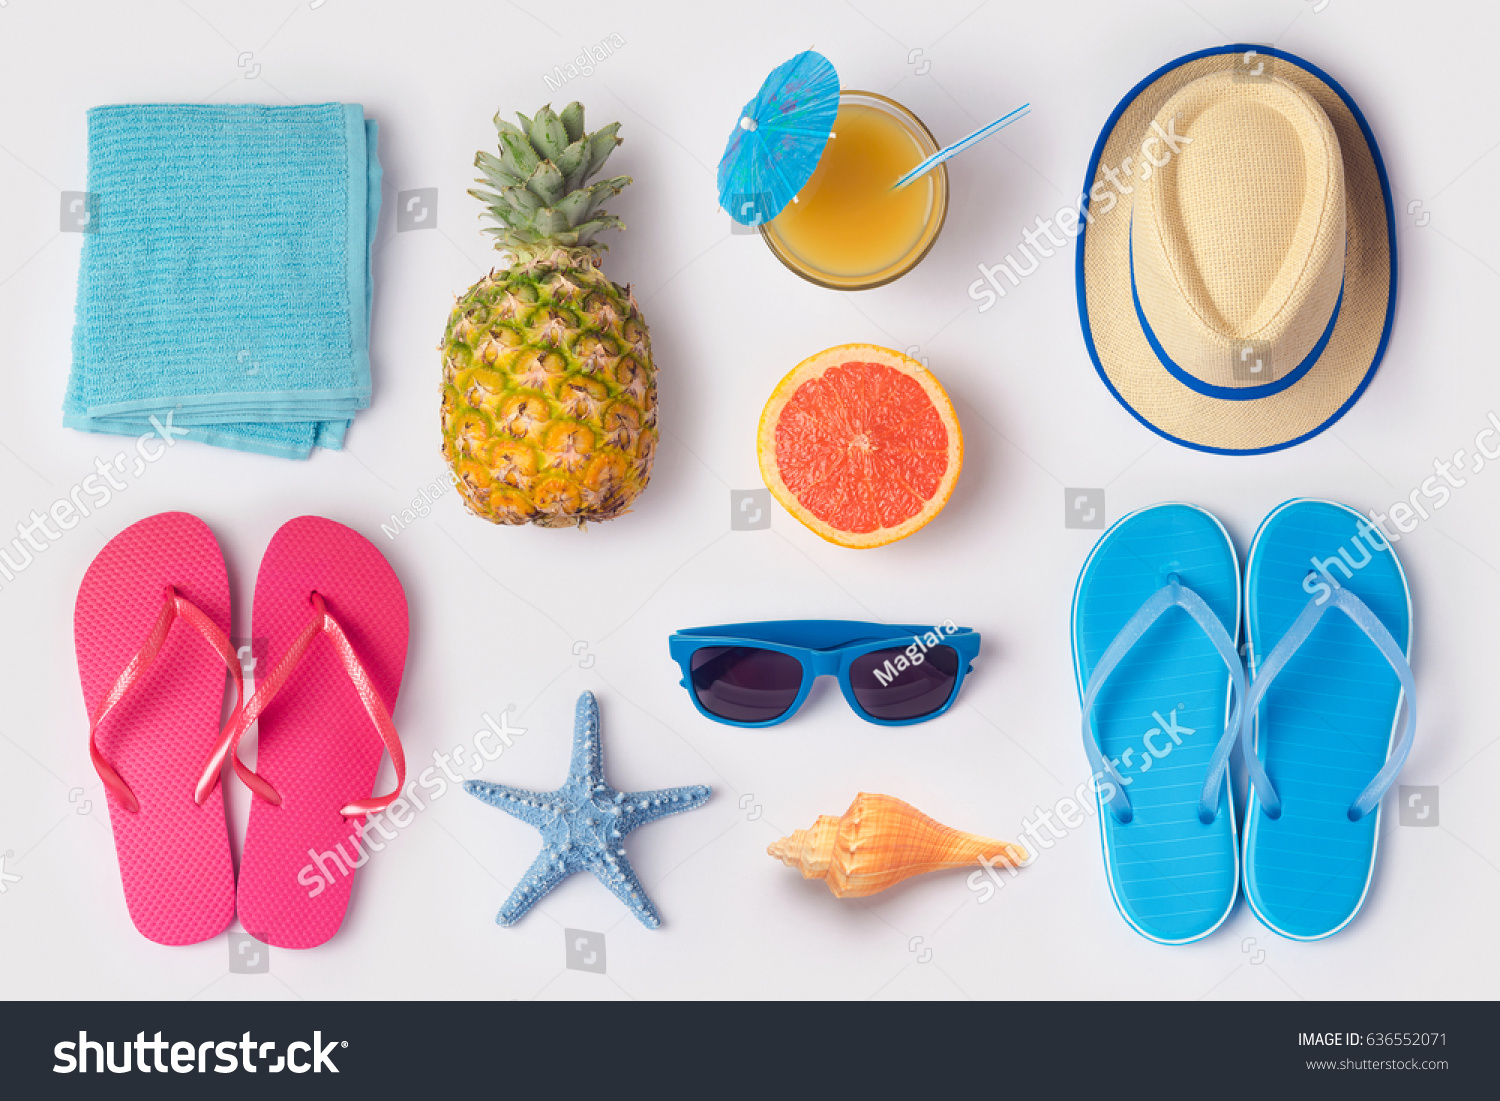 Tropical summer vacation concept with pineapple, juice and flip flops organized on white background. View from above. Flat lay